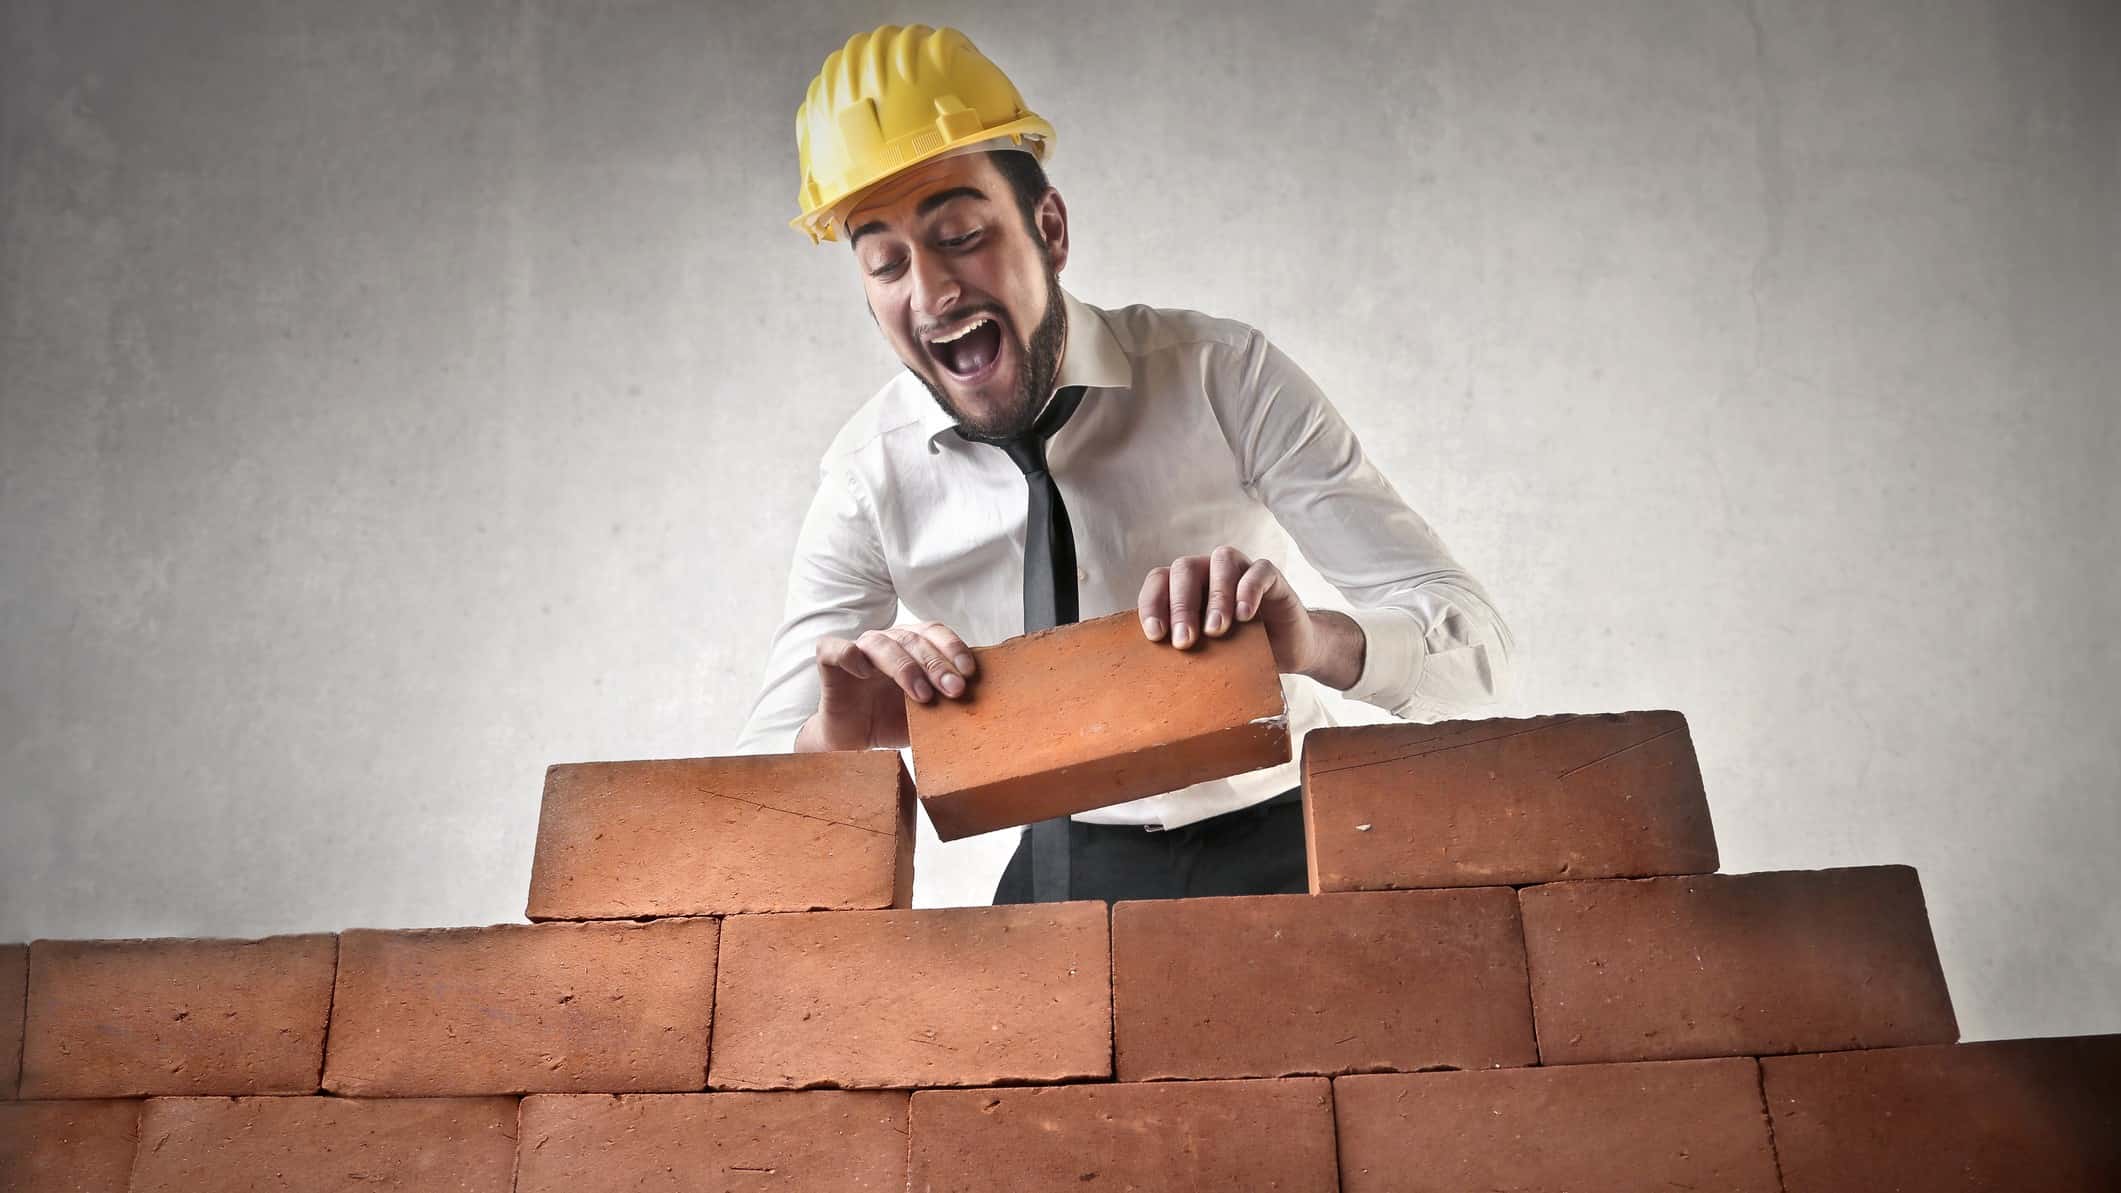 a man wearing a hard hat, a shirt and a tie, lays a brick on a wall he is building with a look of happy joy on his face.